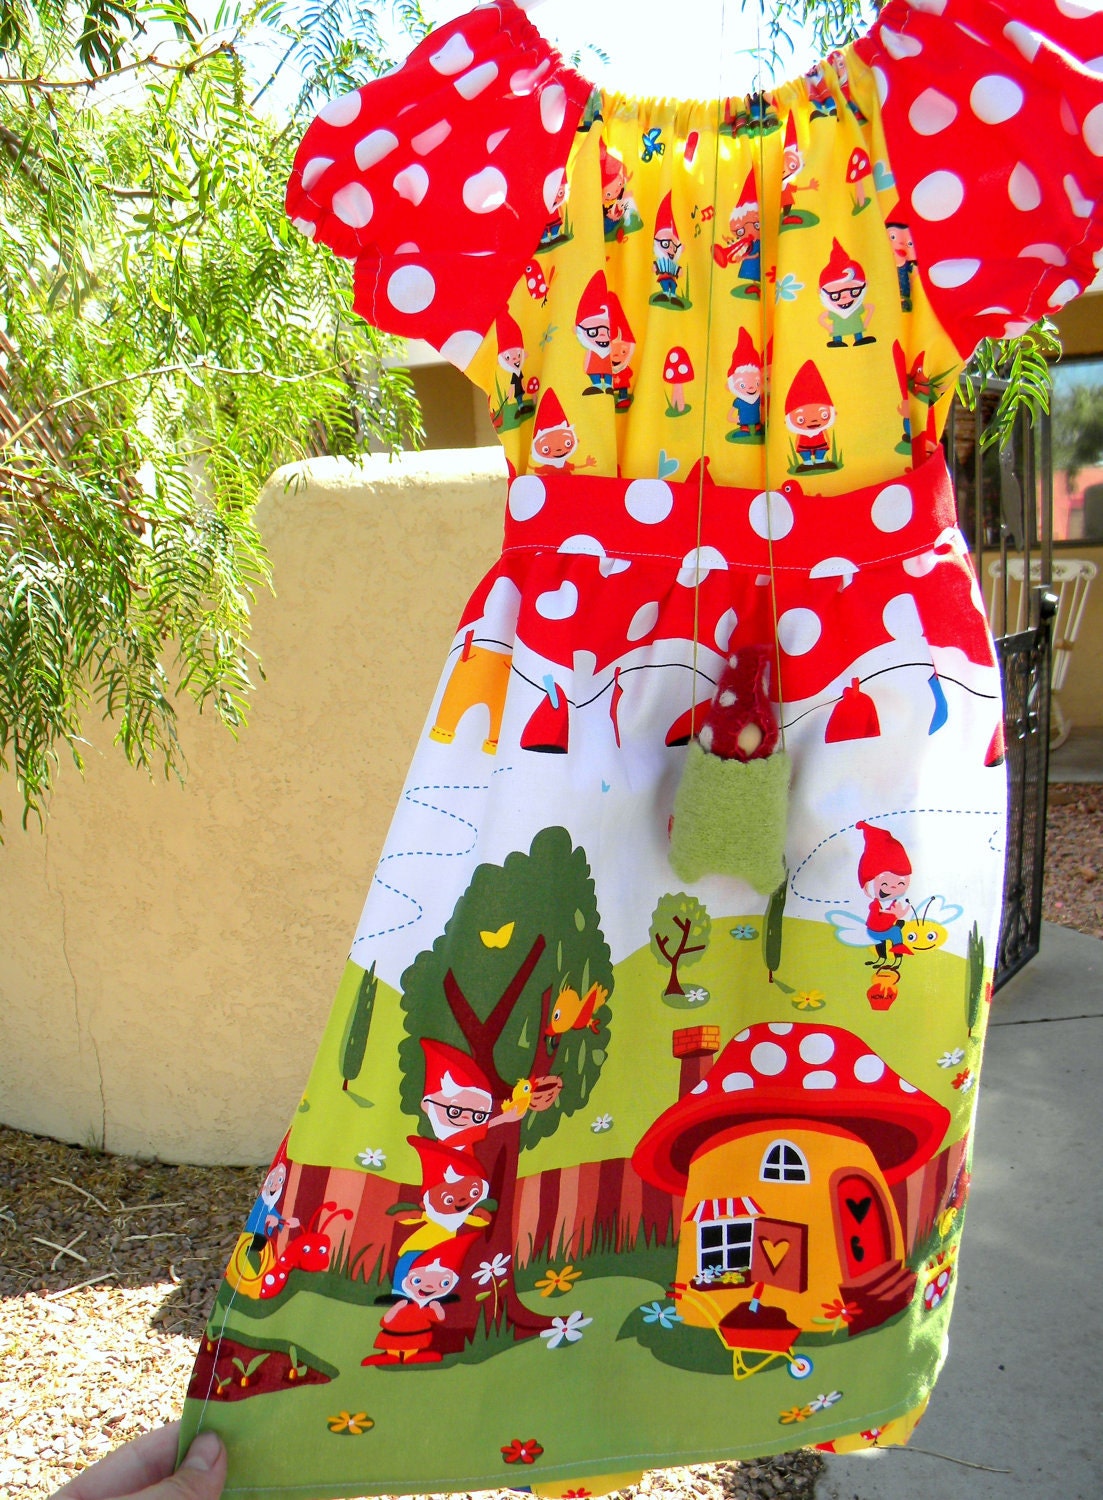 Toadstool Dress & Gnome: Apron Peasant Dress by Pitterpat with matching Toadstool Doll, Waldorf Gnome